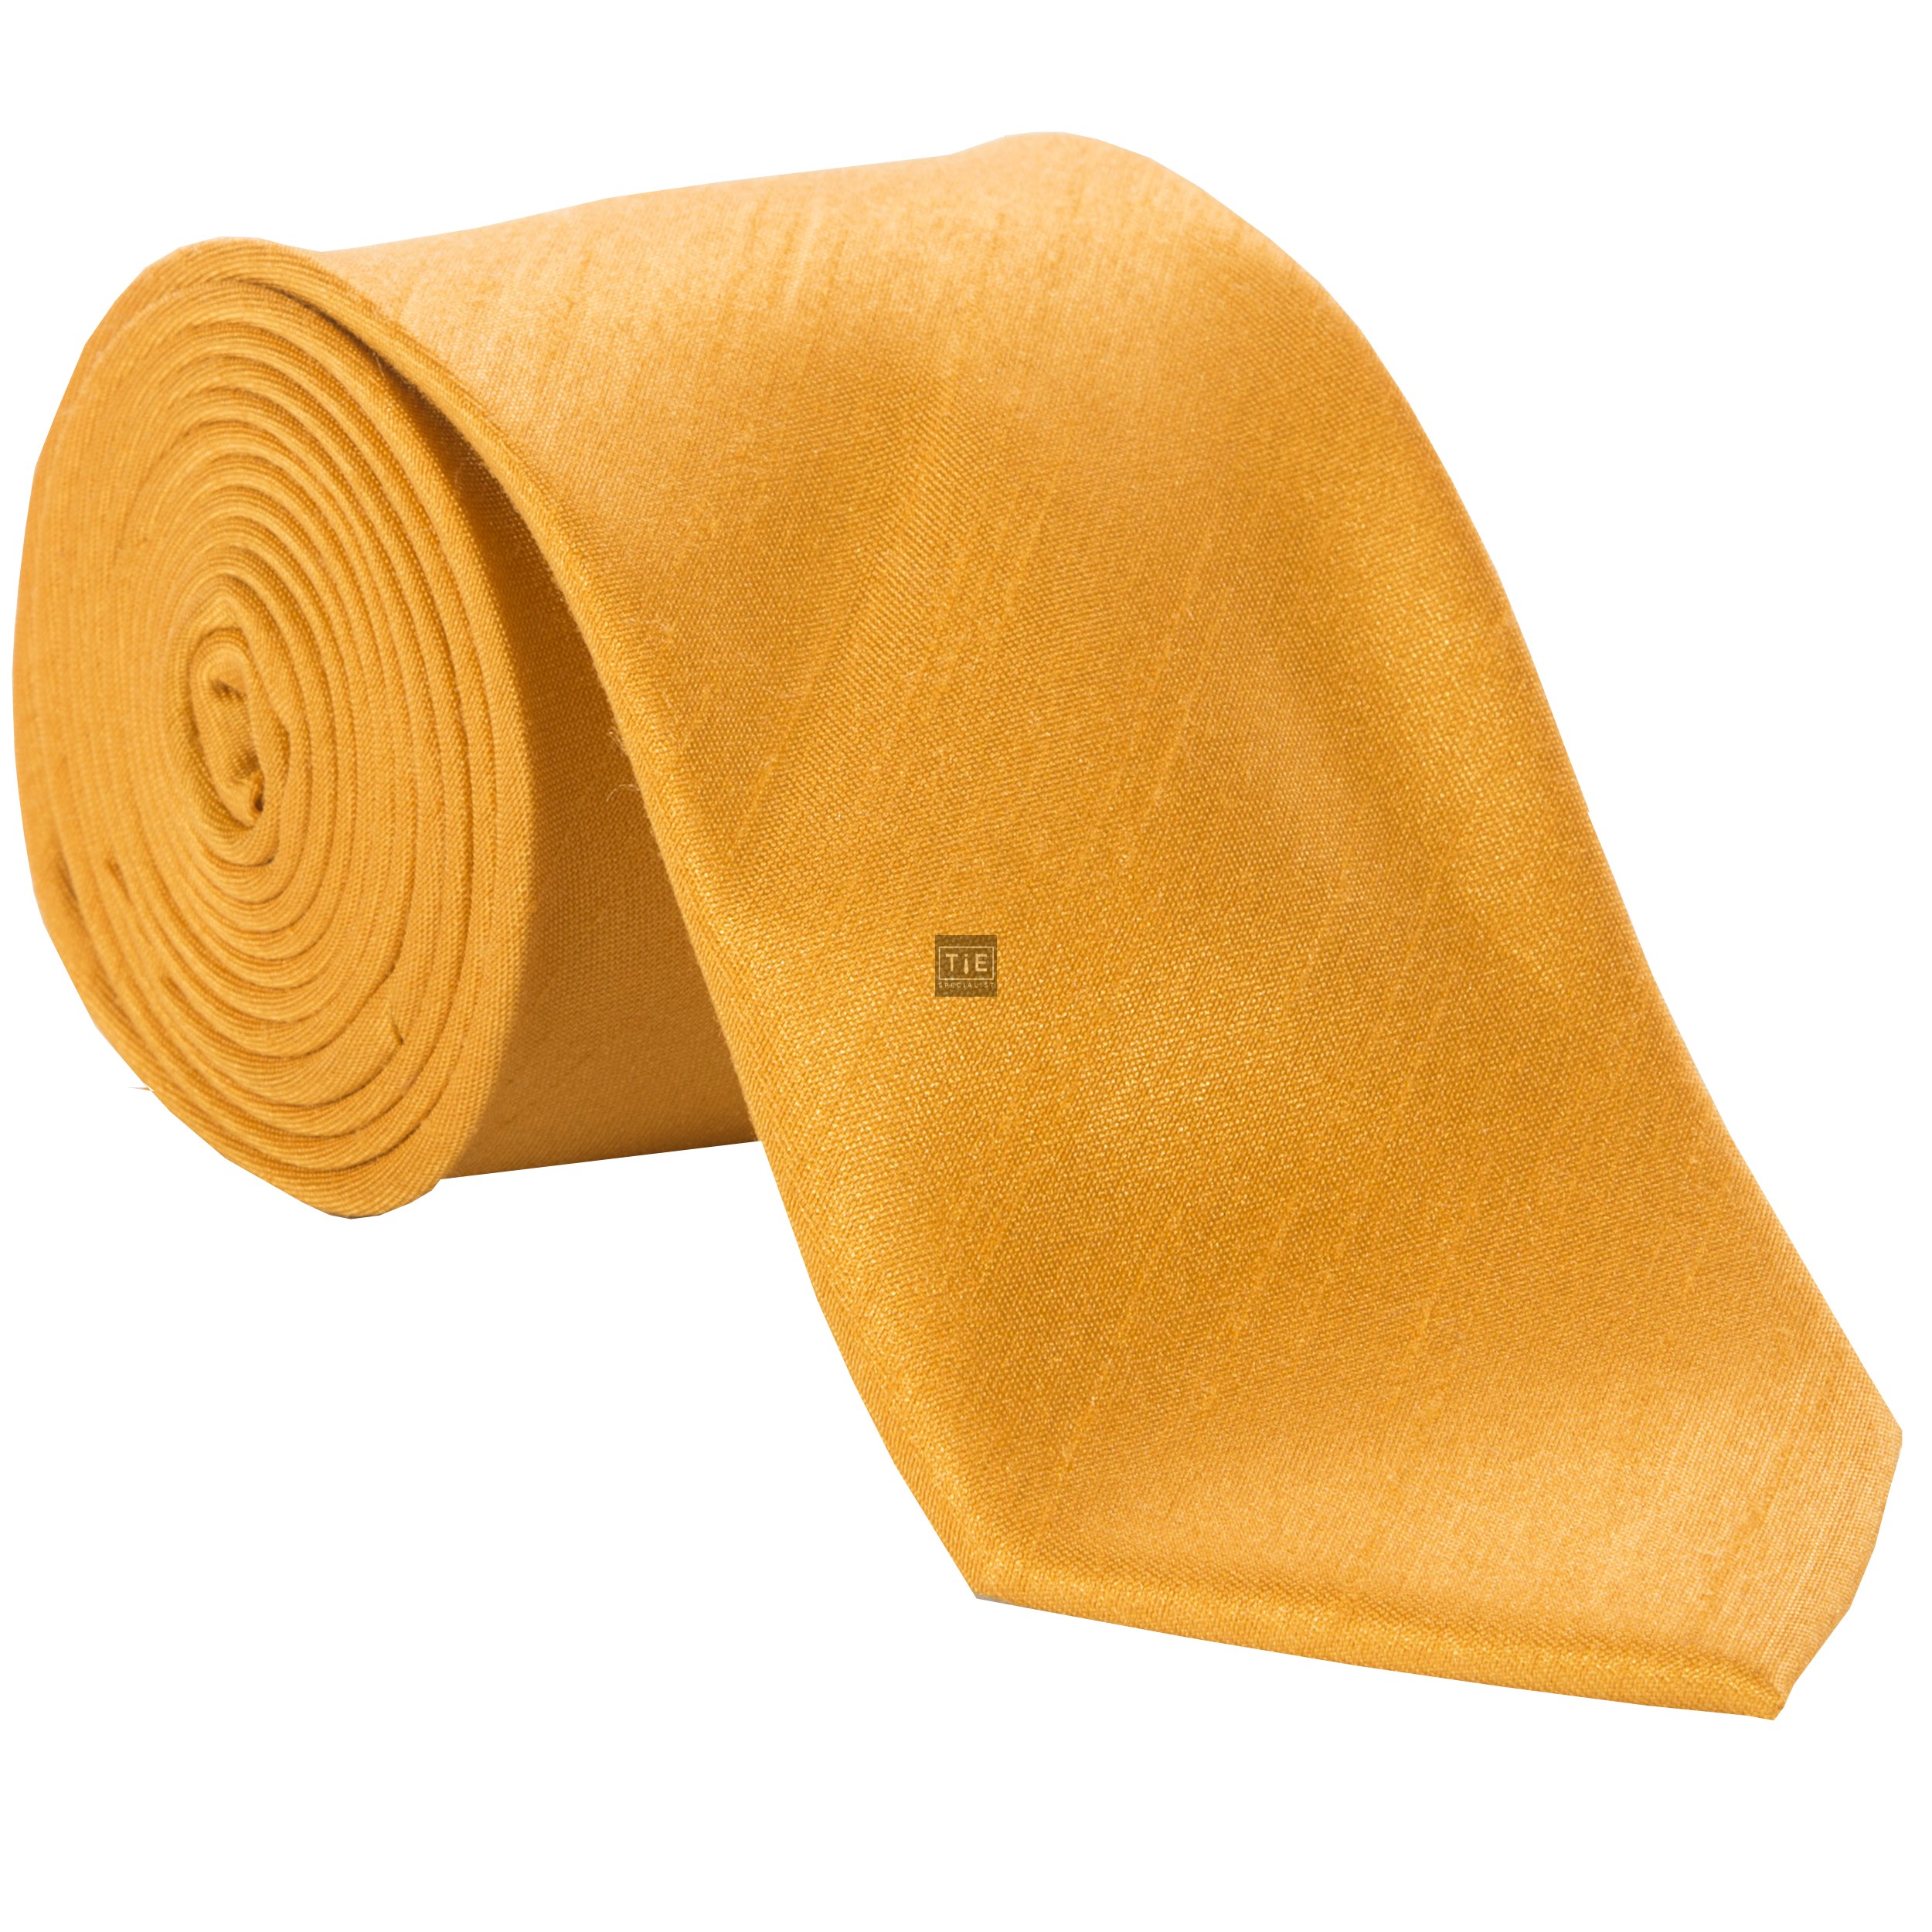 Gold Shantung Tie with Matching Pocket Hankie